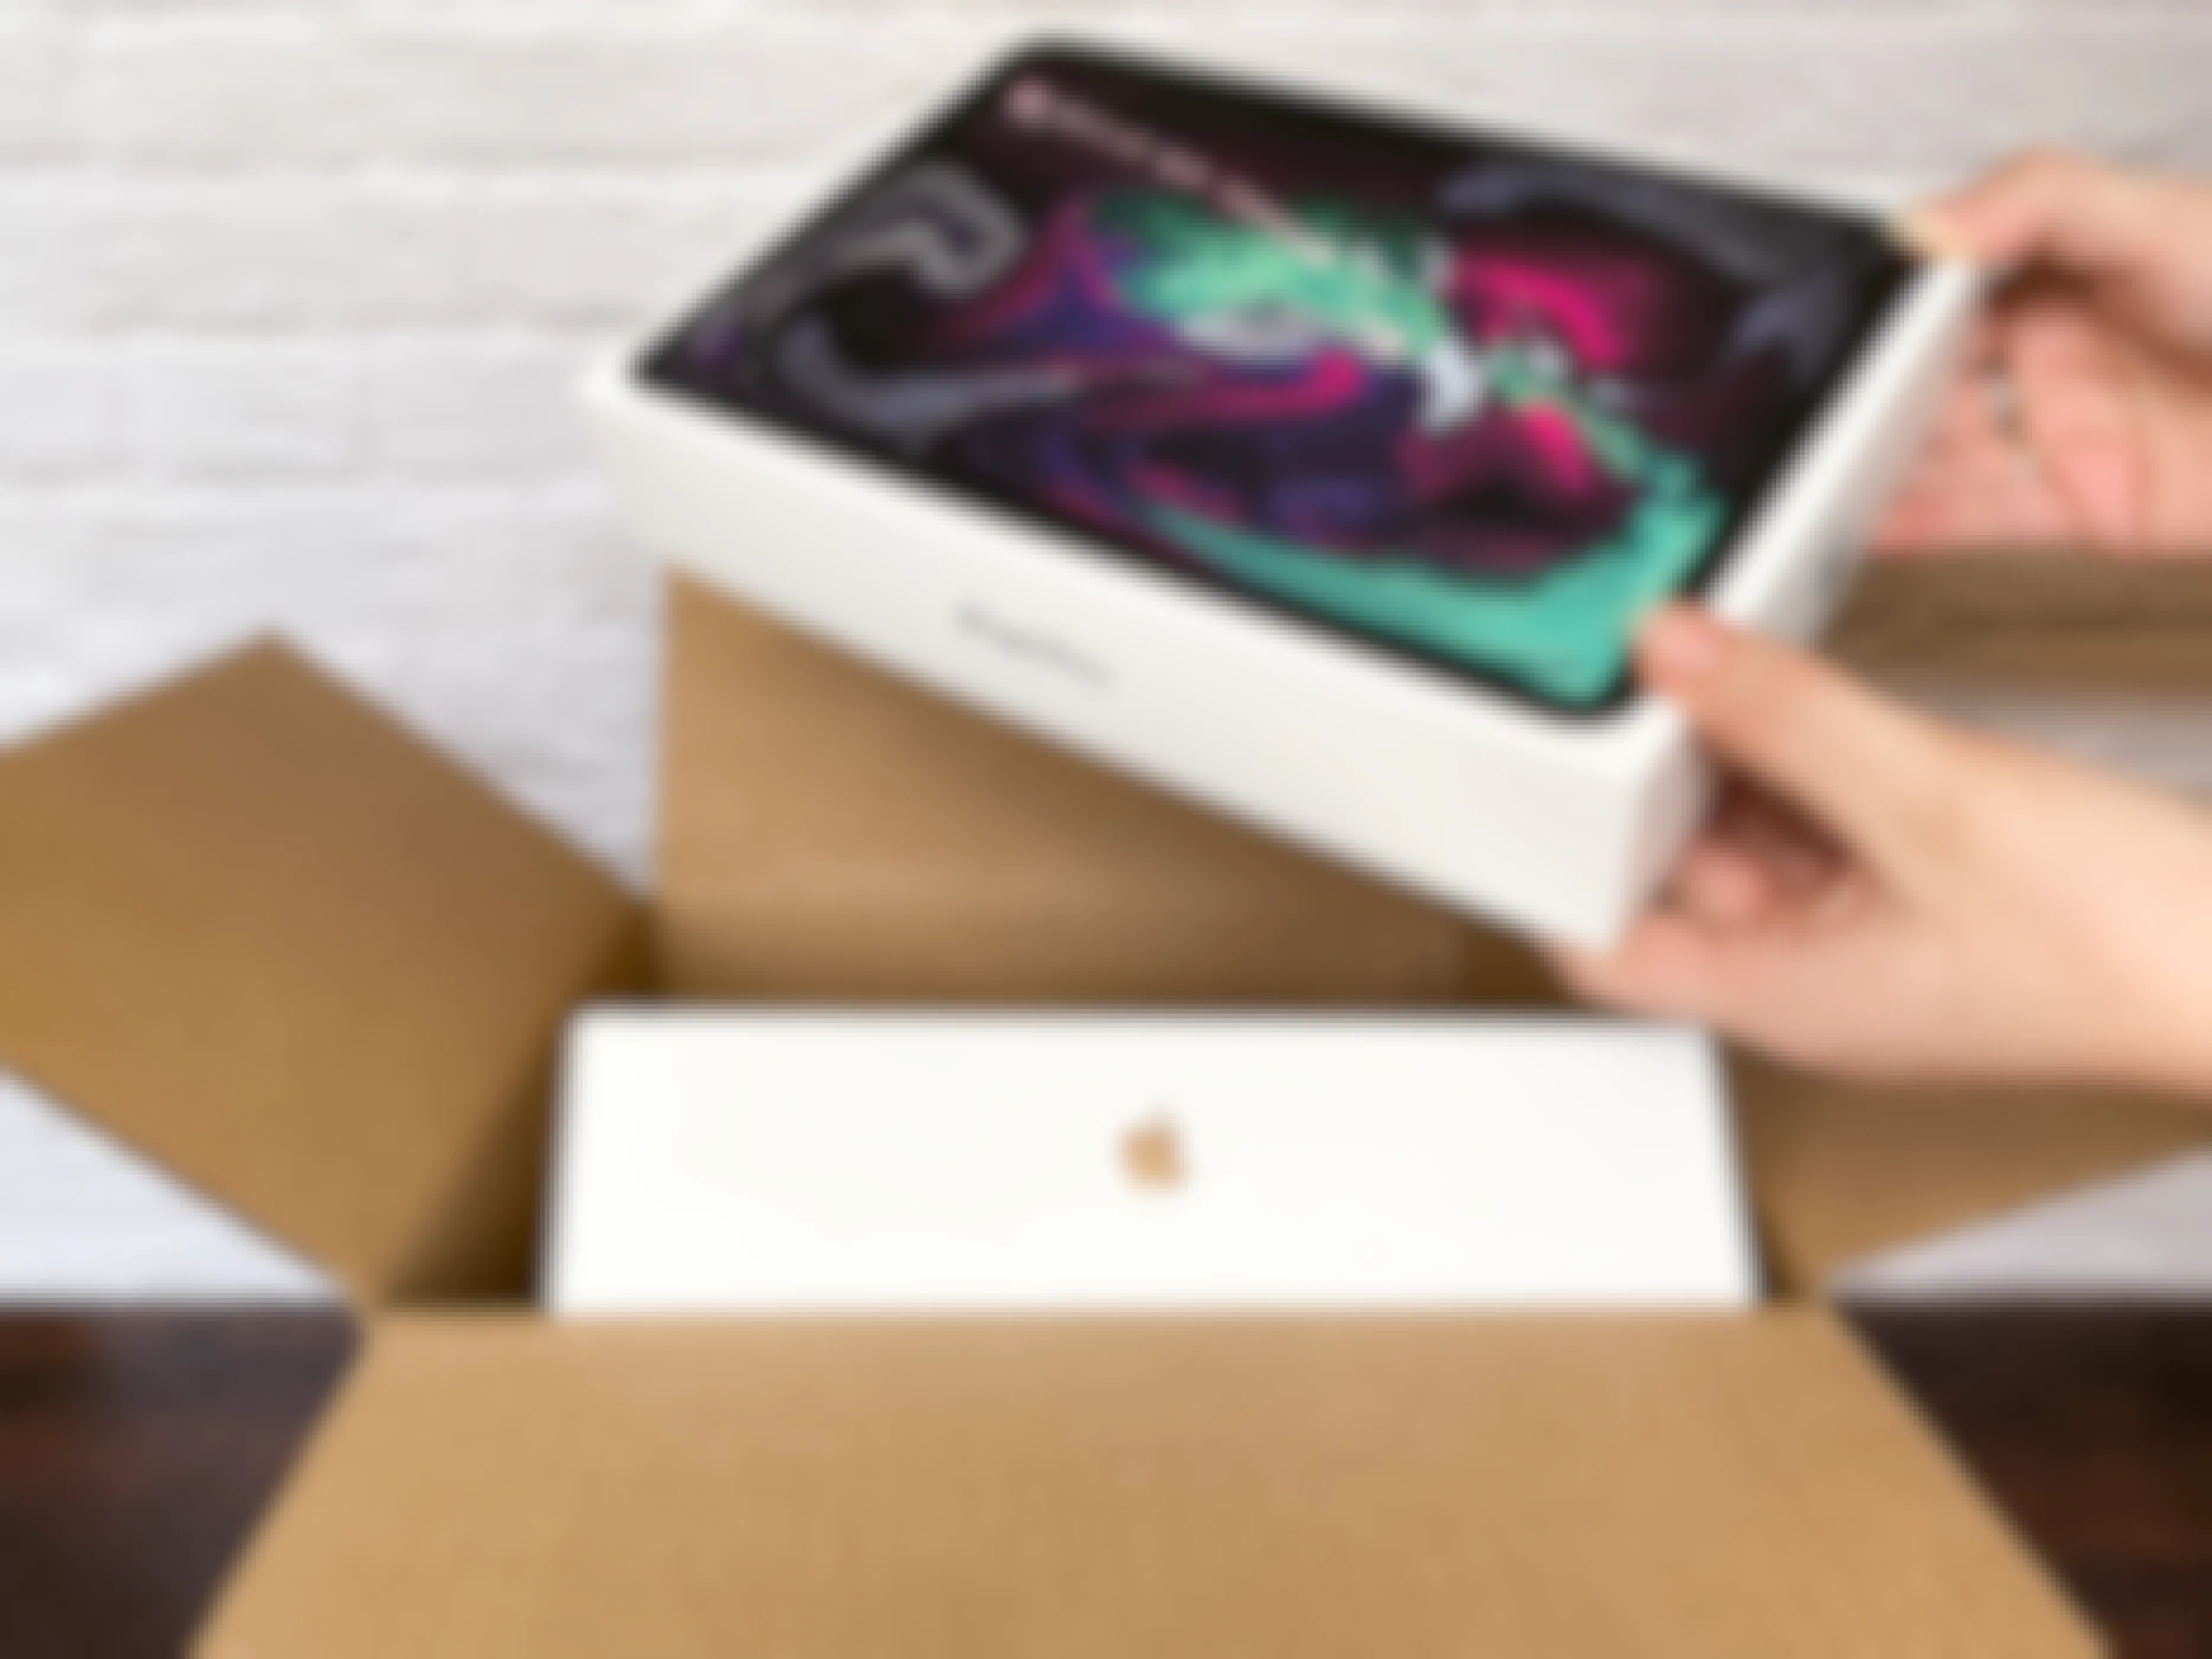 A person taking an iPad pro out of a shipping box with another Apple product inside.